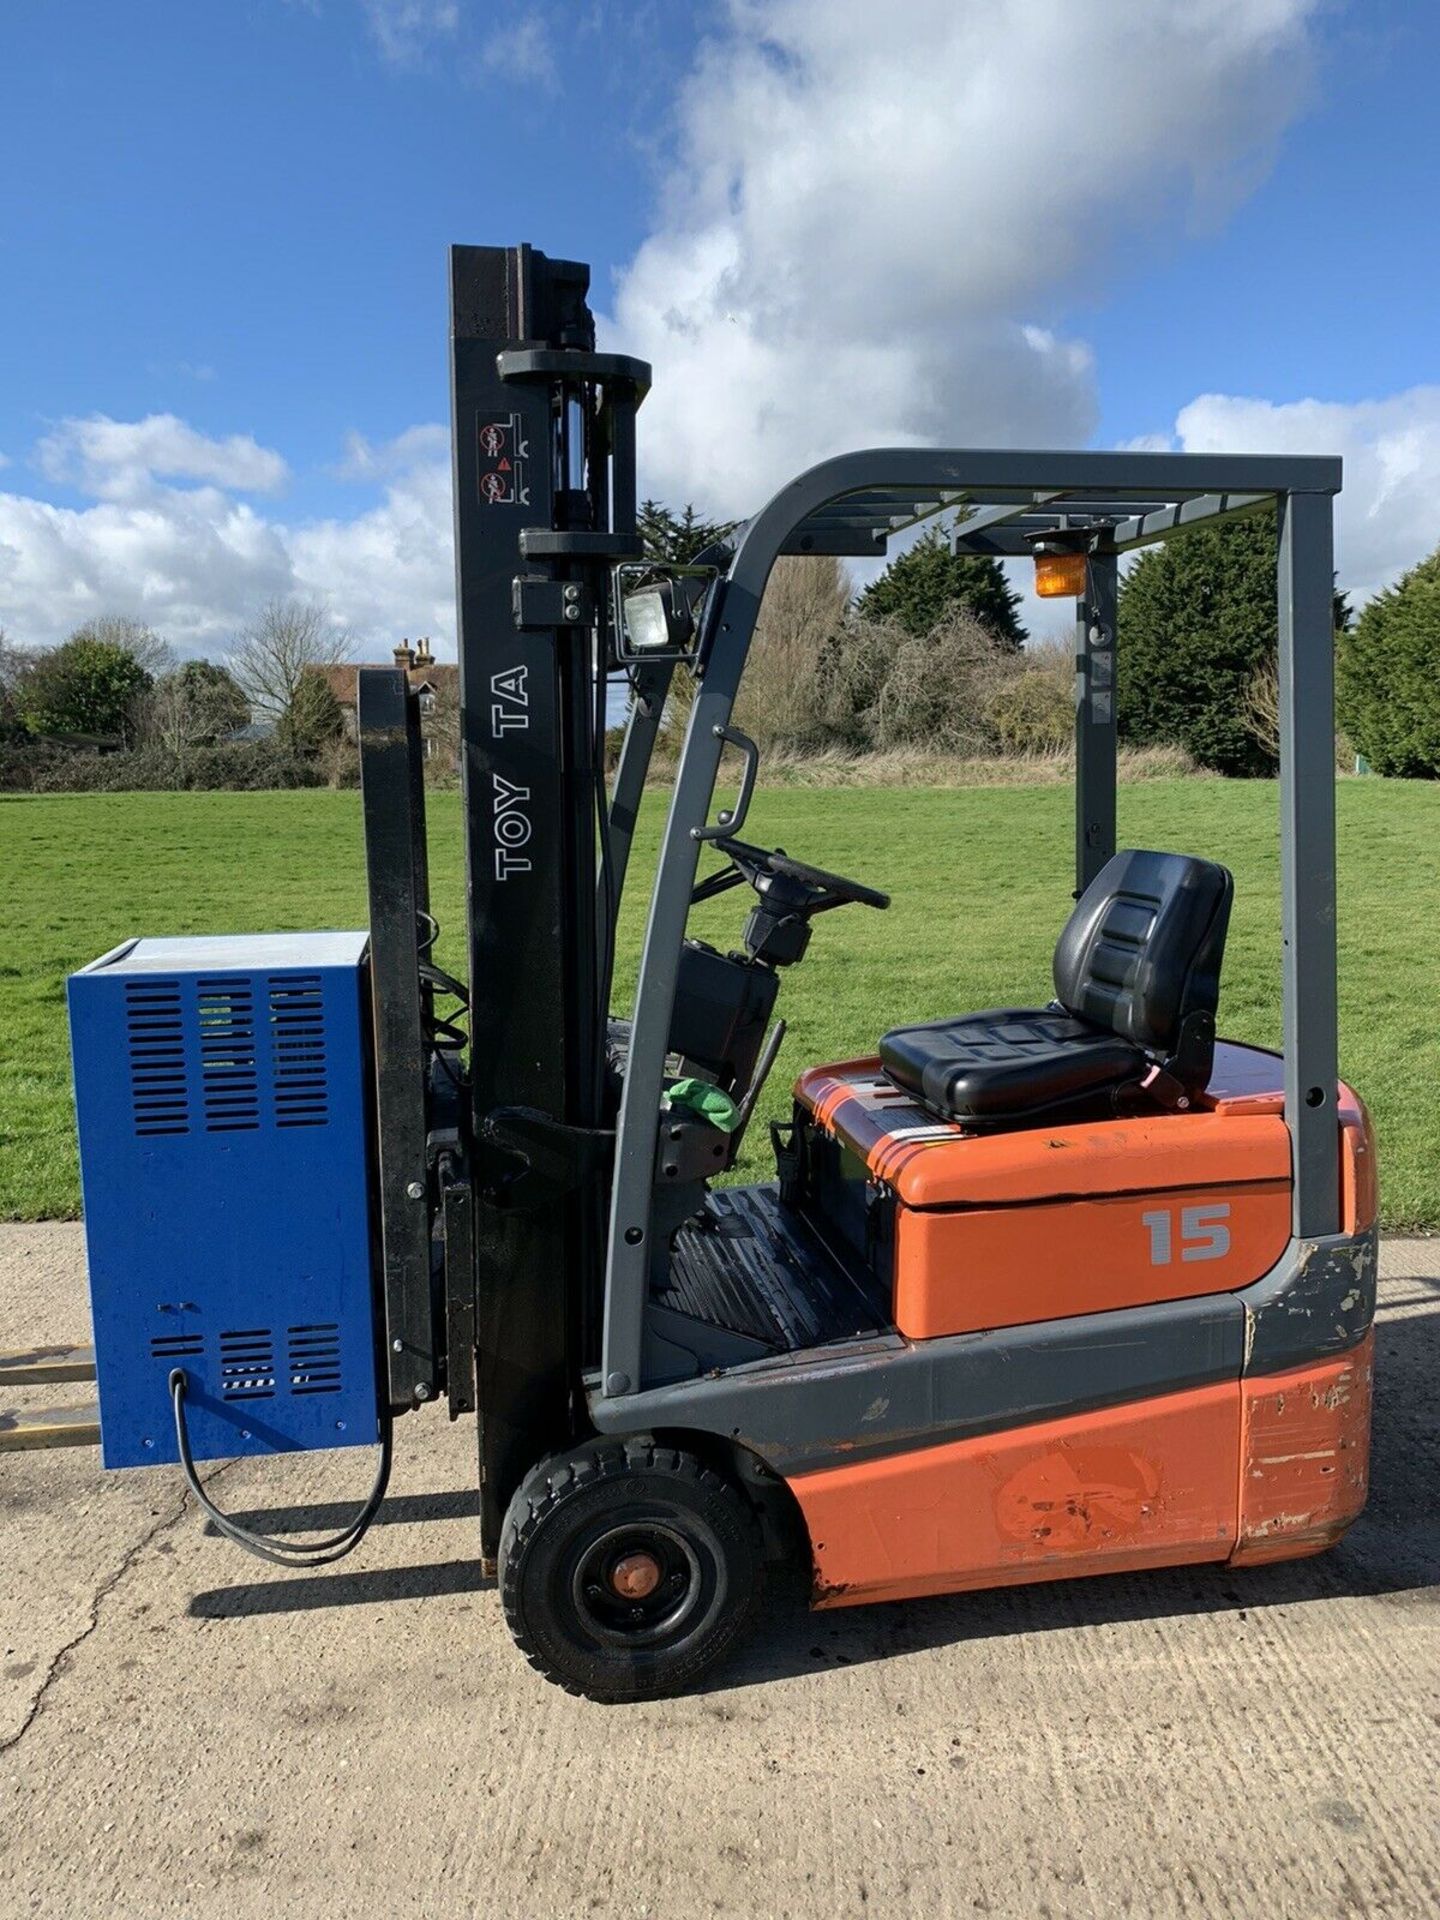 Toyota 1.5 Tonne Electric forklift truck - Image 2 of 3